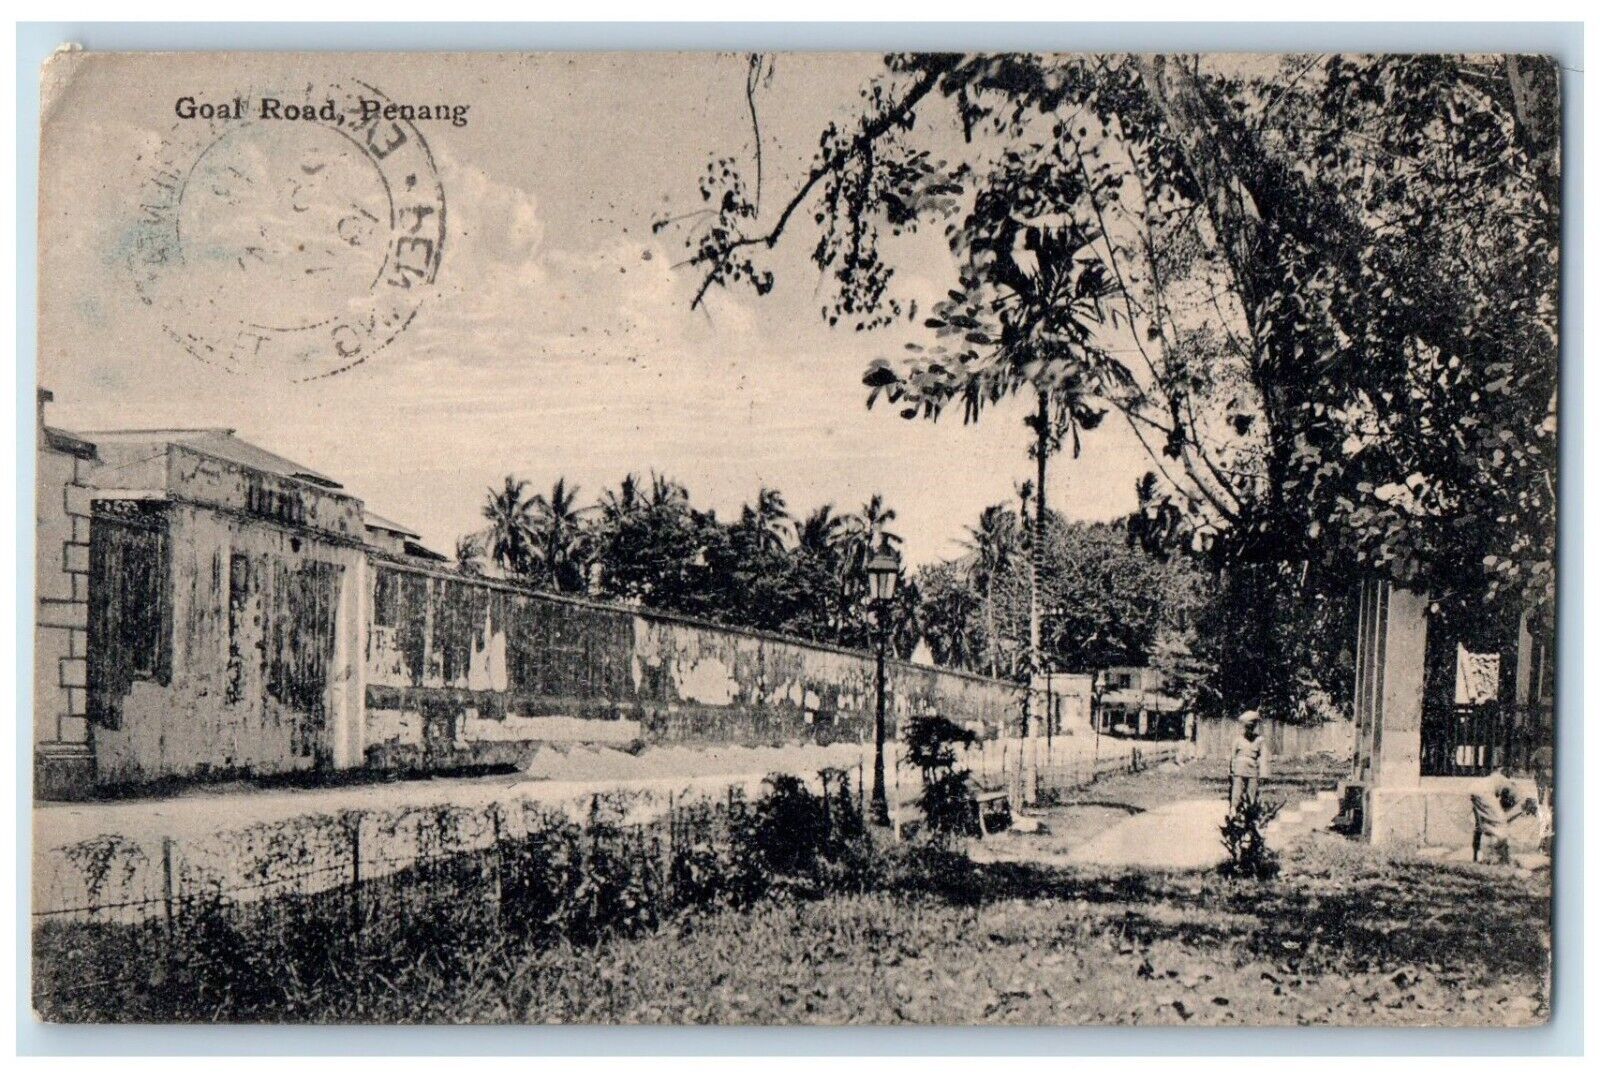 1914 View Of Goal Road Penang Malaysia, Dirt Road Posted Antique Postcard